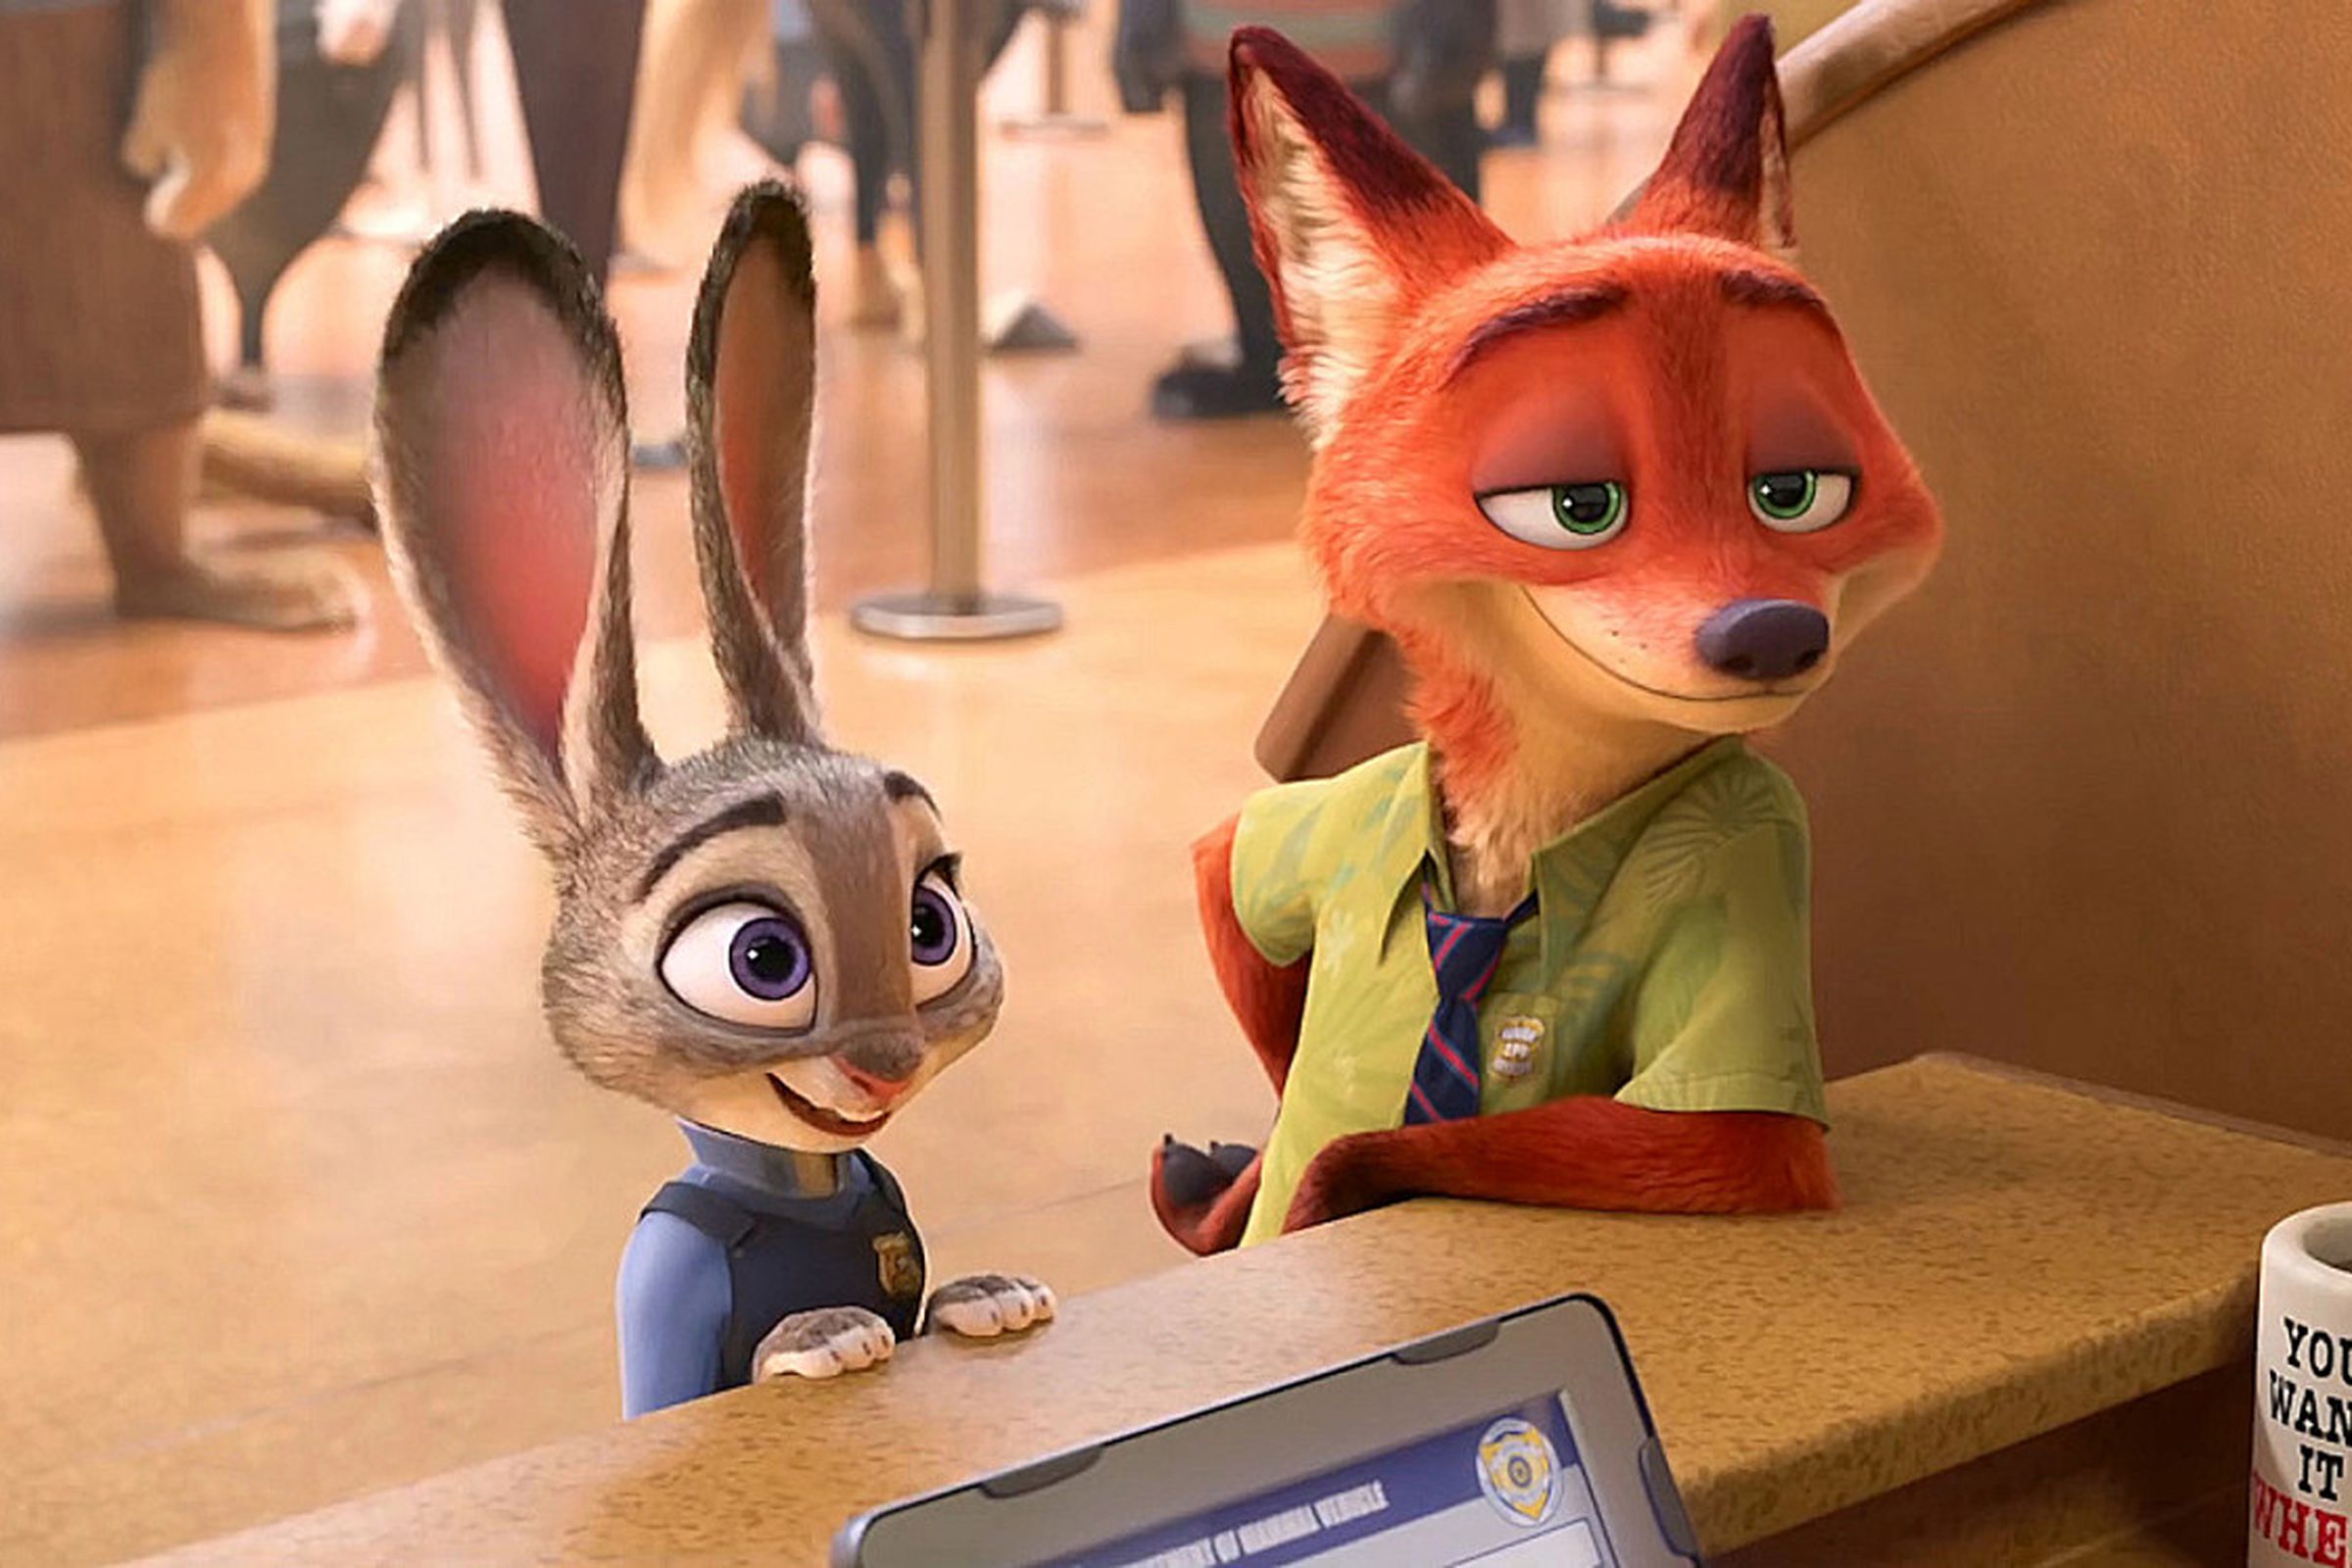 An anthropomorphic rabbit in a police uniform and an anthropomorphic fox in a green shirt and tie standing at a counter.